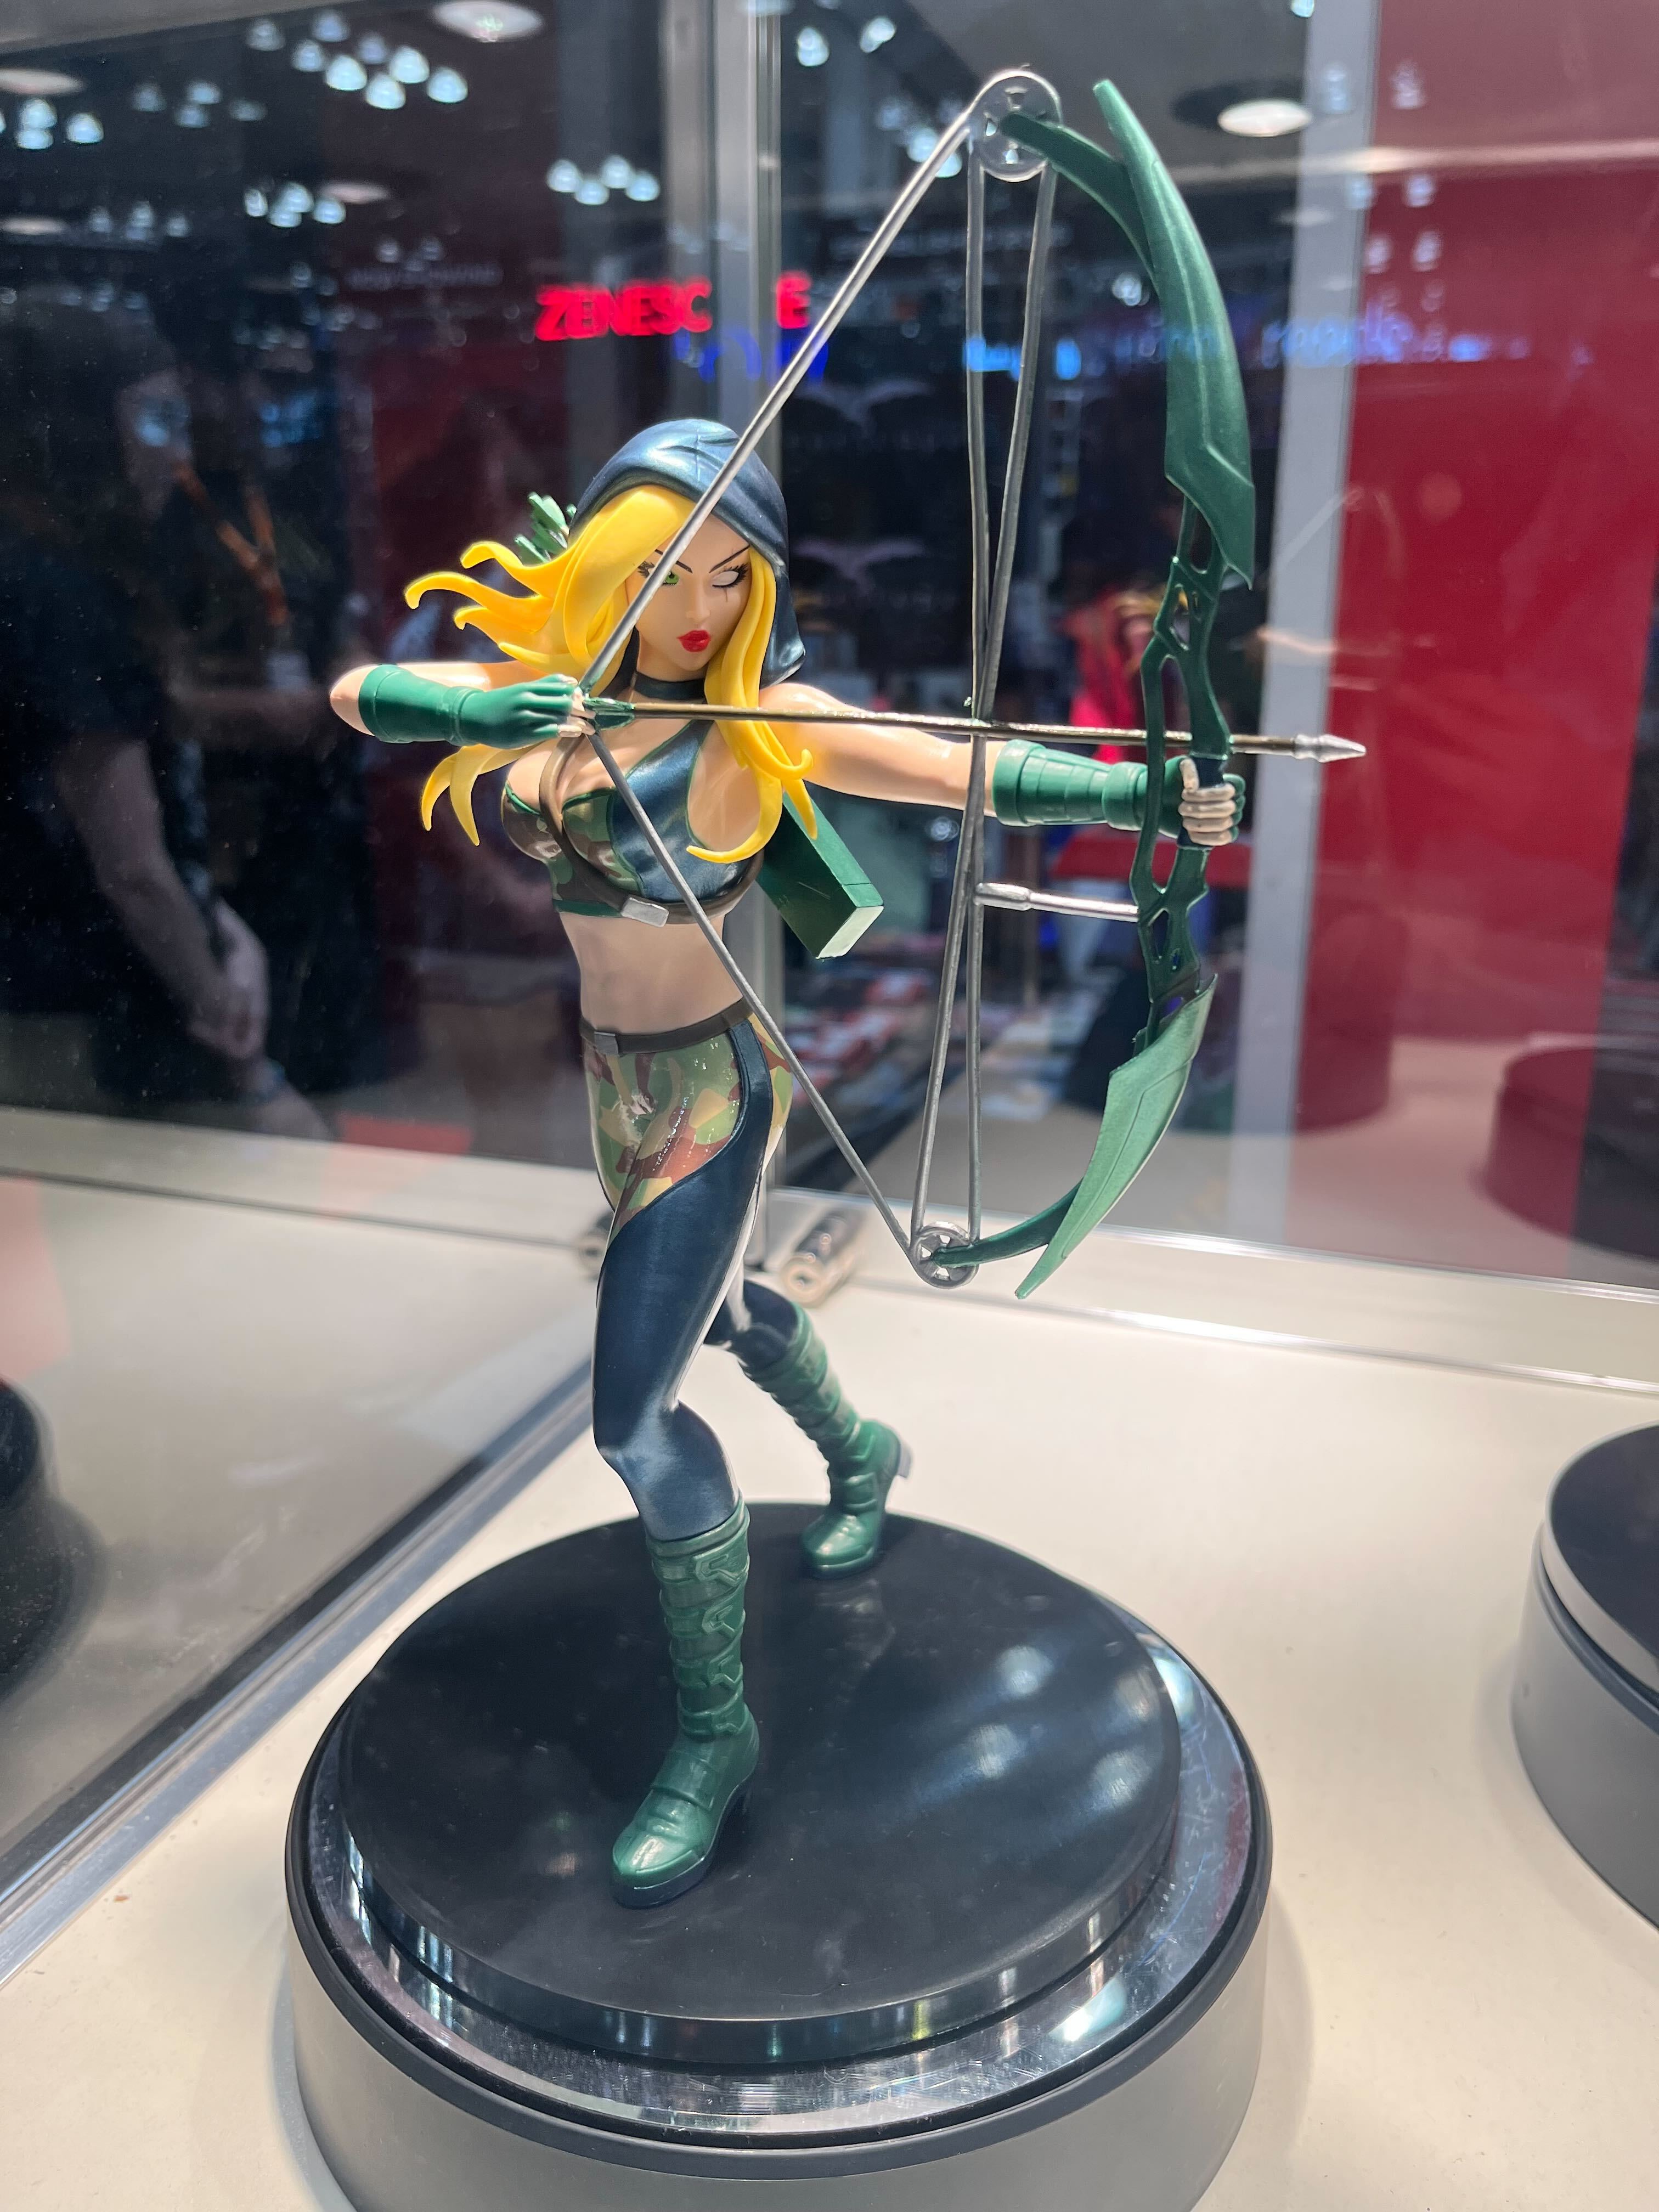 Things you can buy at comic con - figurine